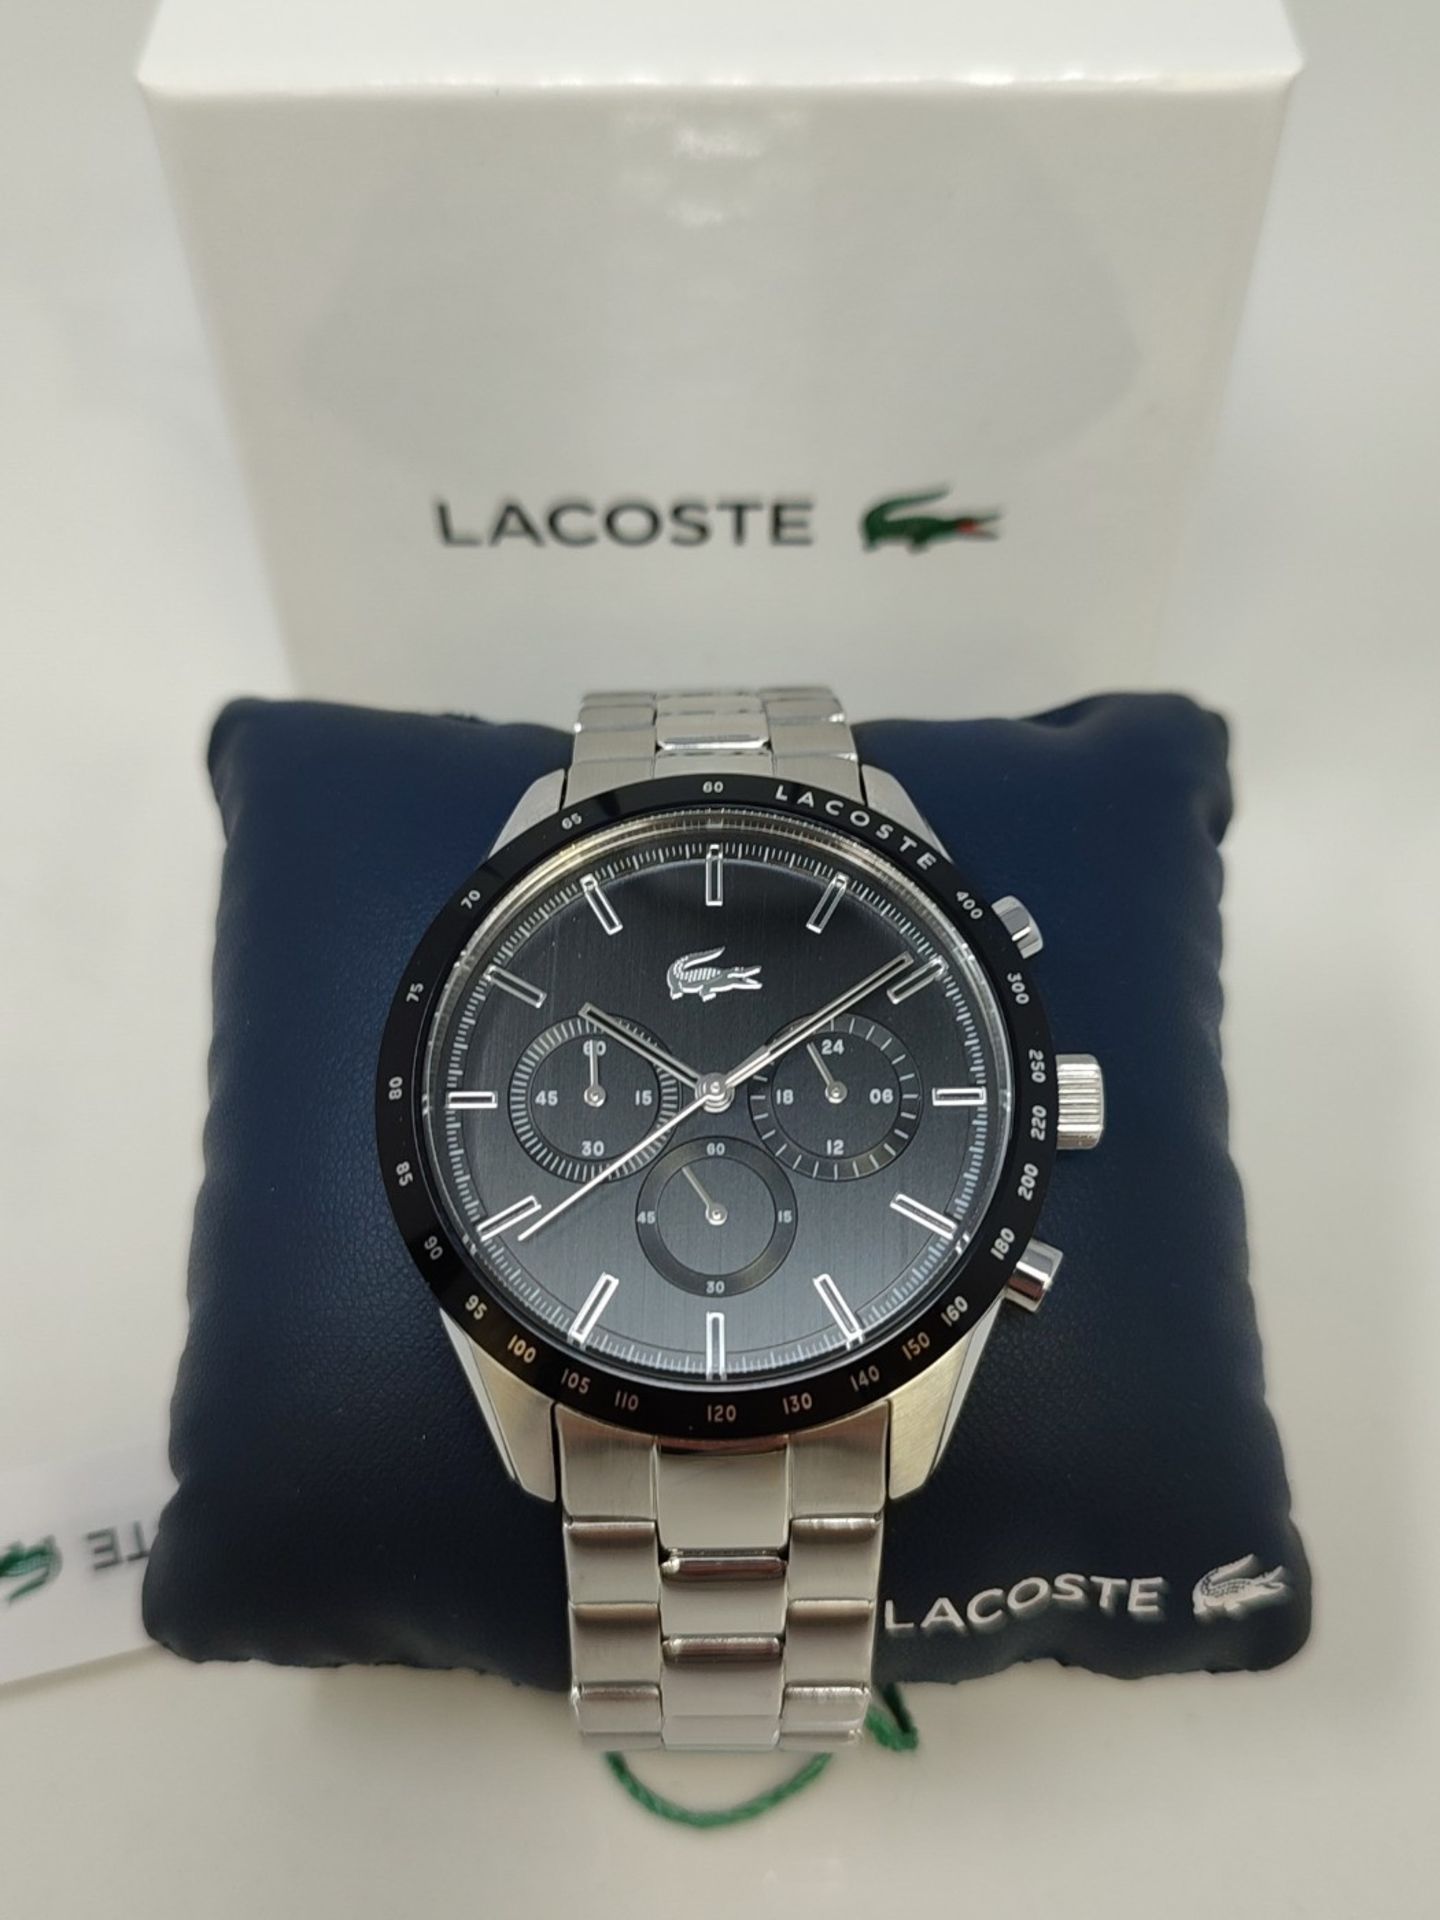 RRP £143.00 Lacoste Chronograph Quartz Watch for Men with Silver Stainless Steel Bracelet - 201107 - Image 2 of 3